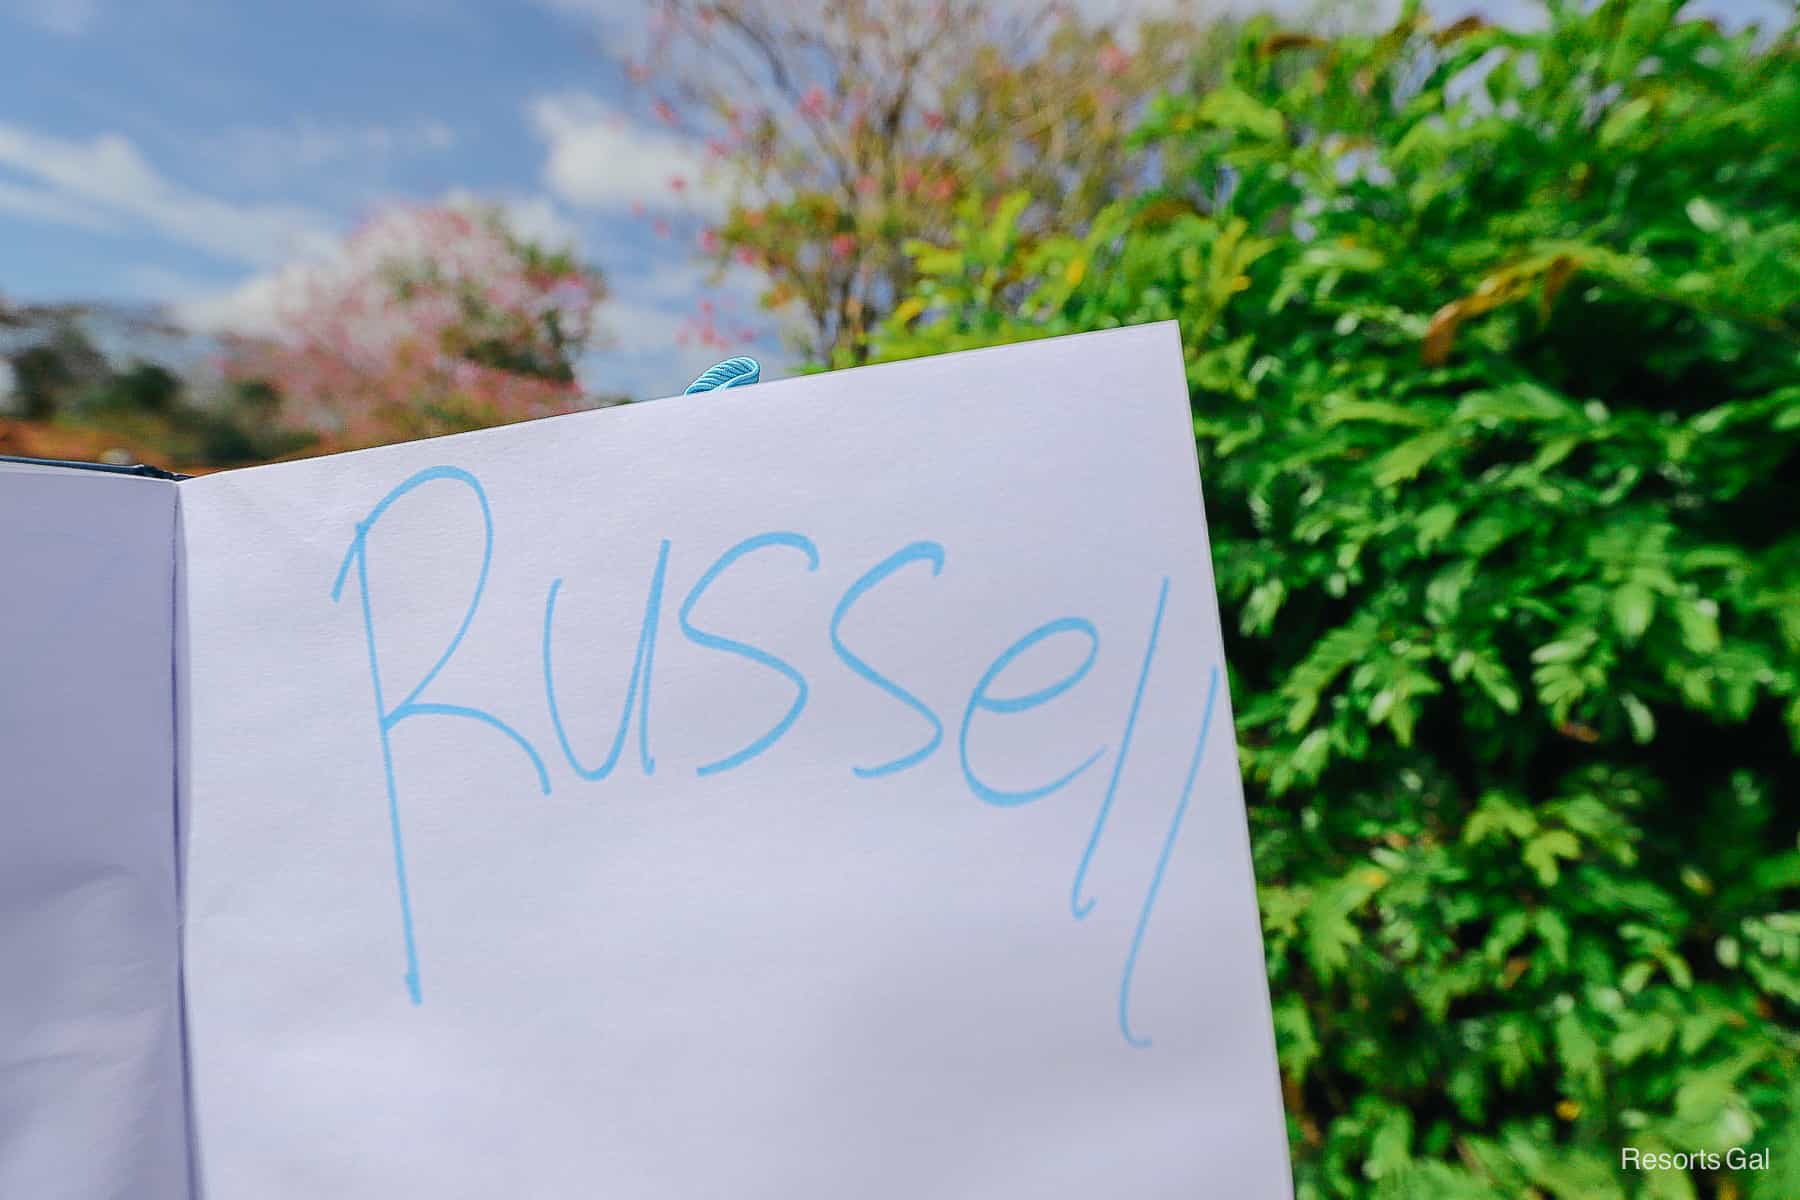 Russell's character signature 